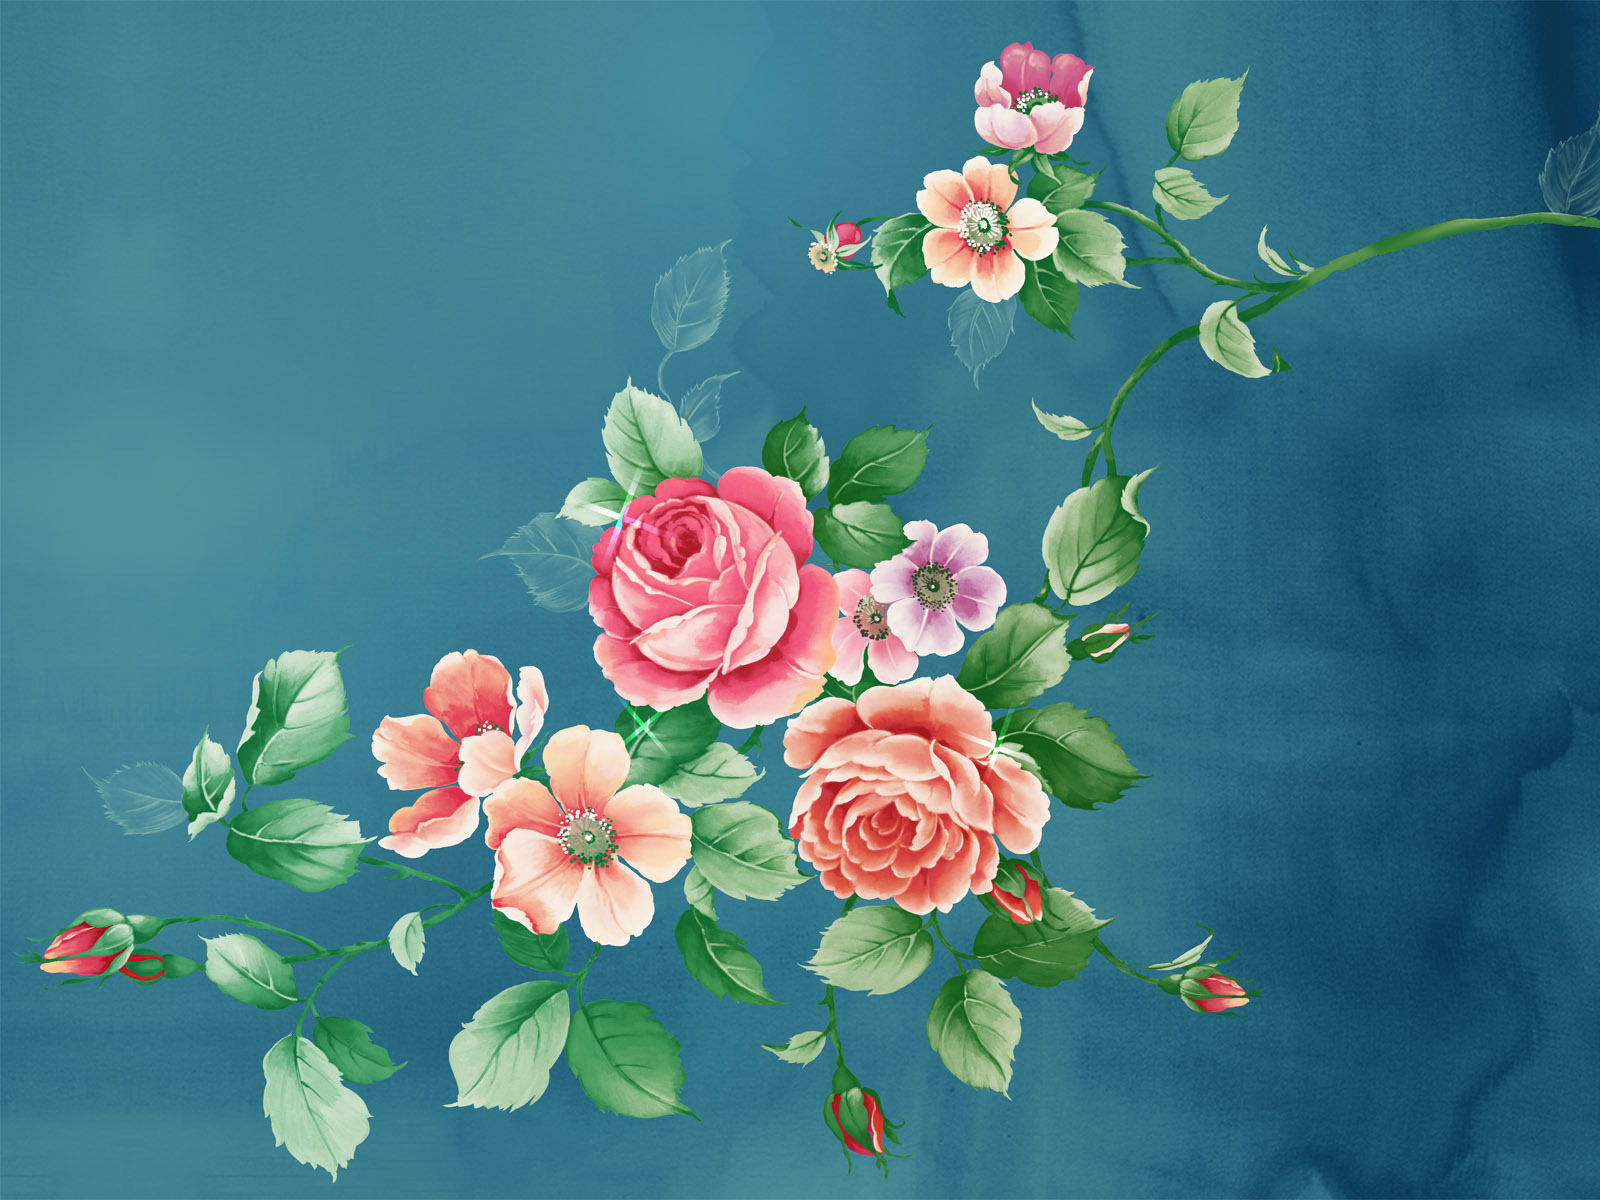 plants, roses, pictures, flowers, turquoise